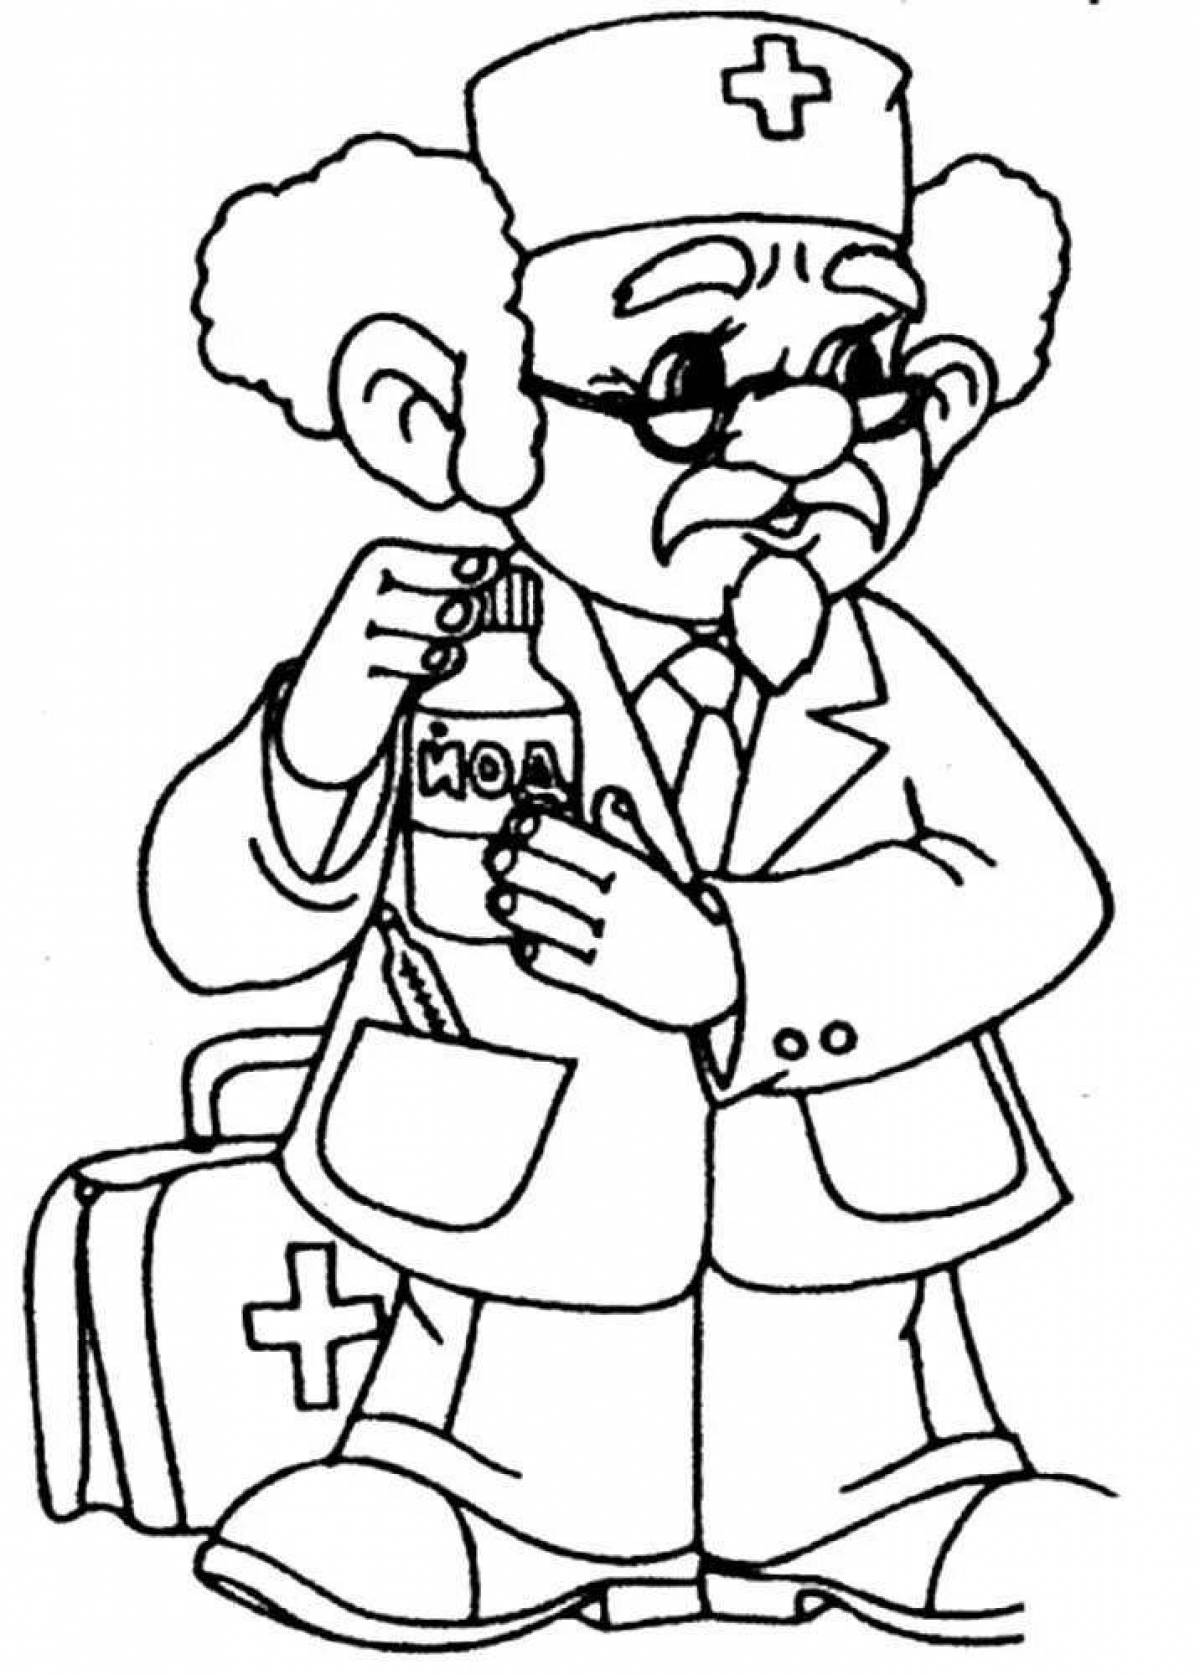 Exciting doctor figurine coloring page